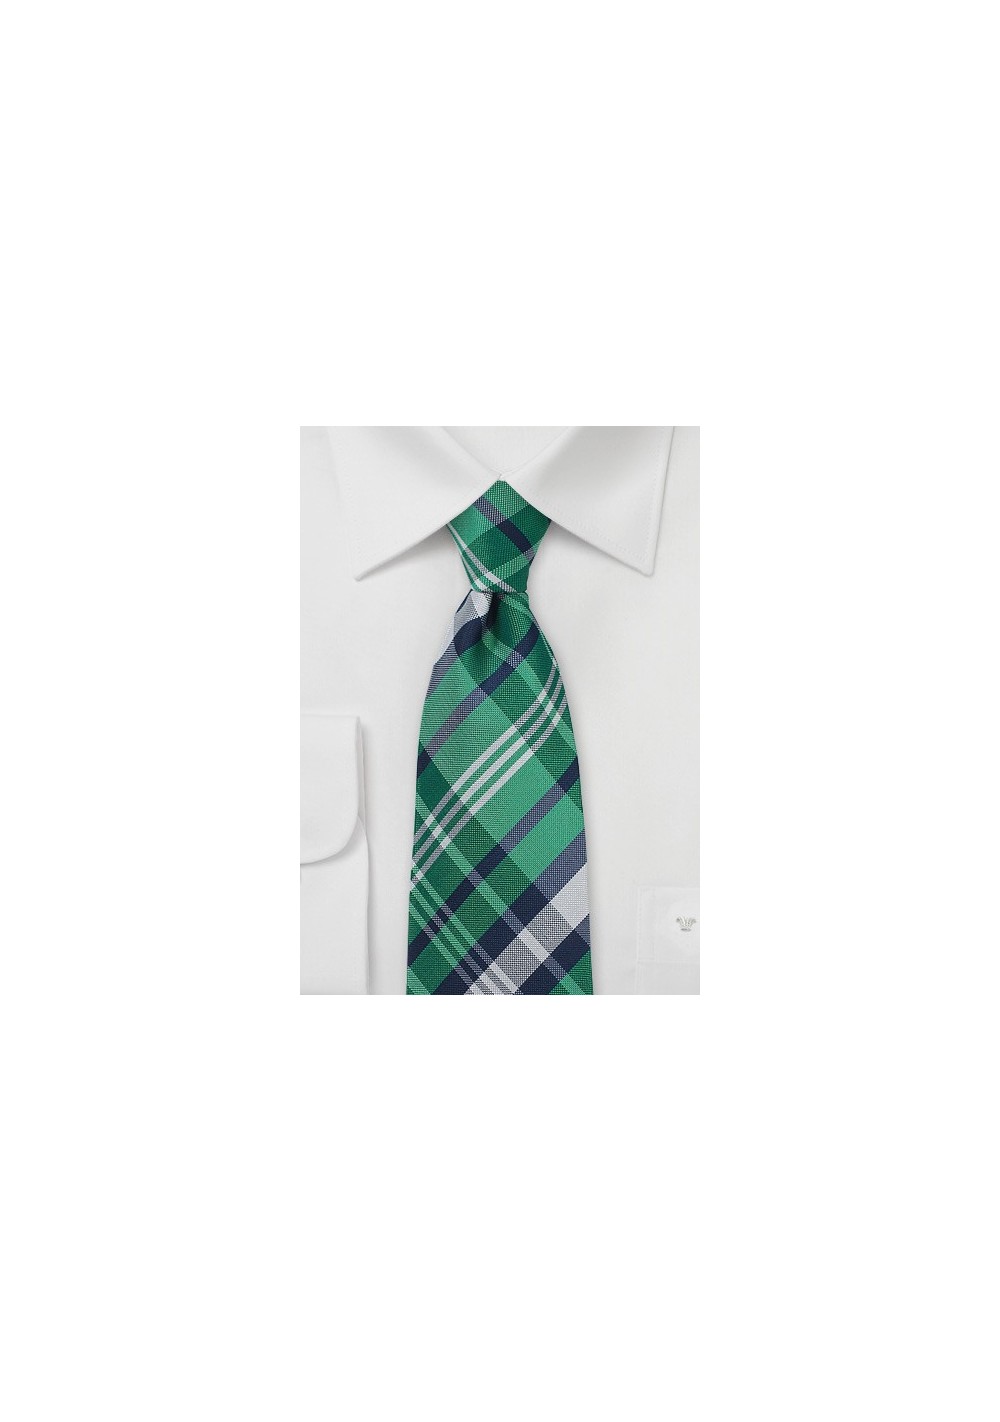 Green and Navy Tartan Plaid Tie in XL Length